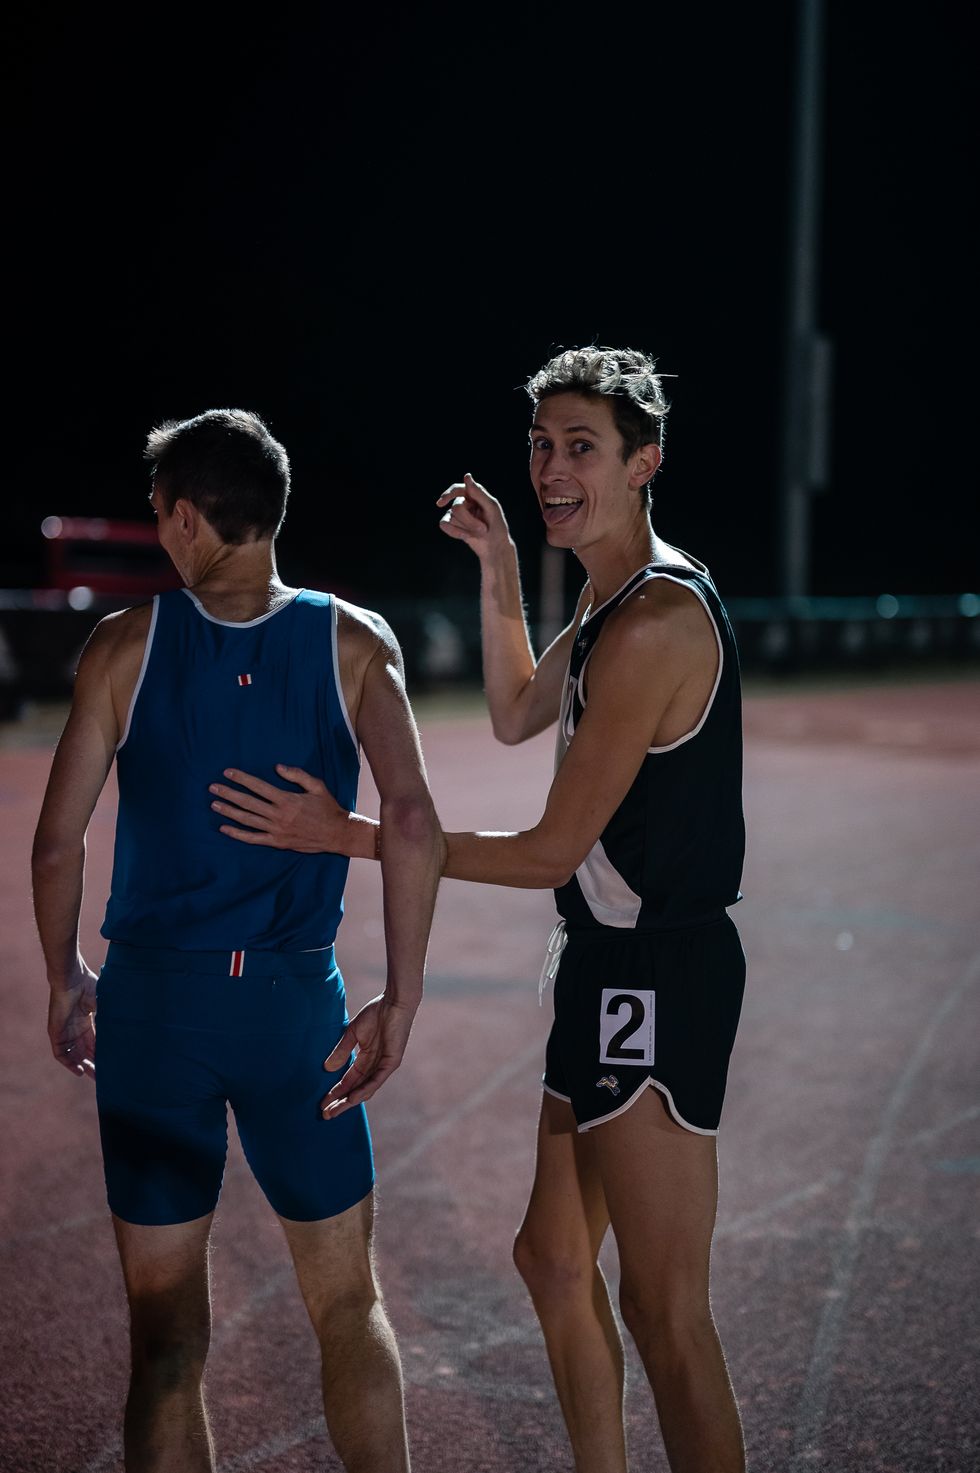 nick willis left celebrates with mason ferlic right after getting his 19th consecutive year of running a sub 4 mile